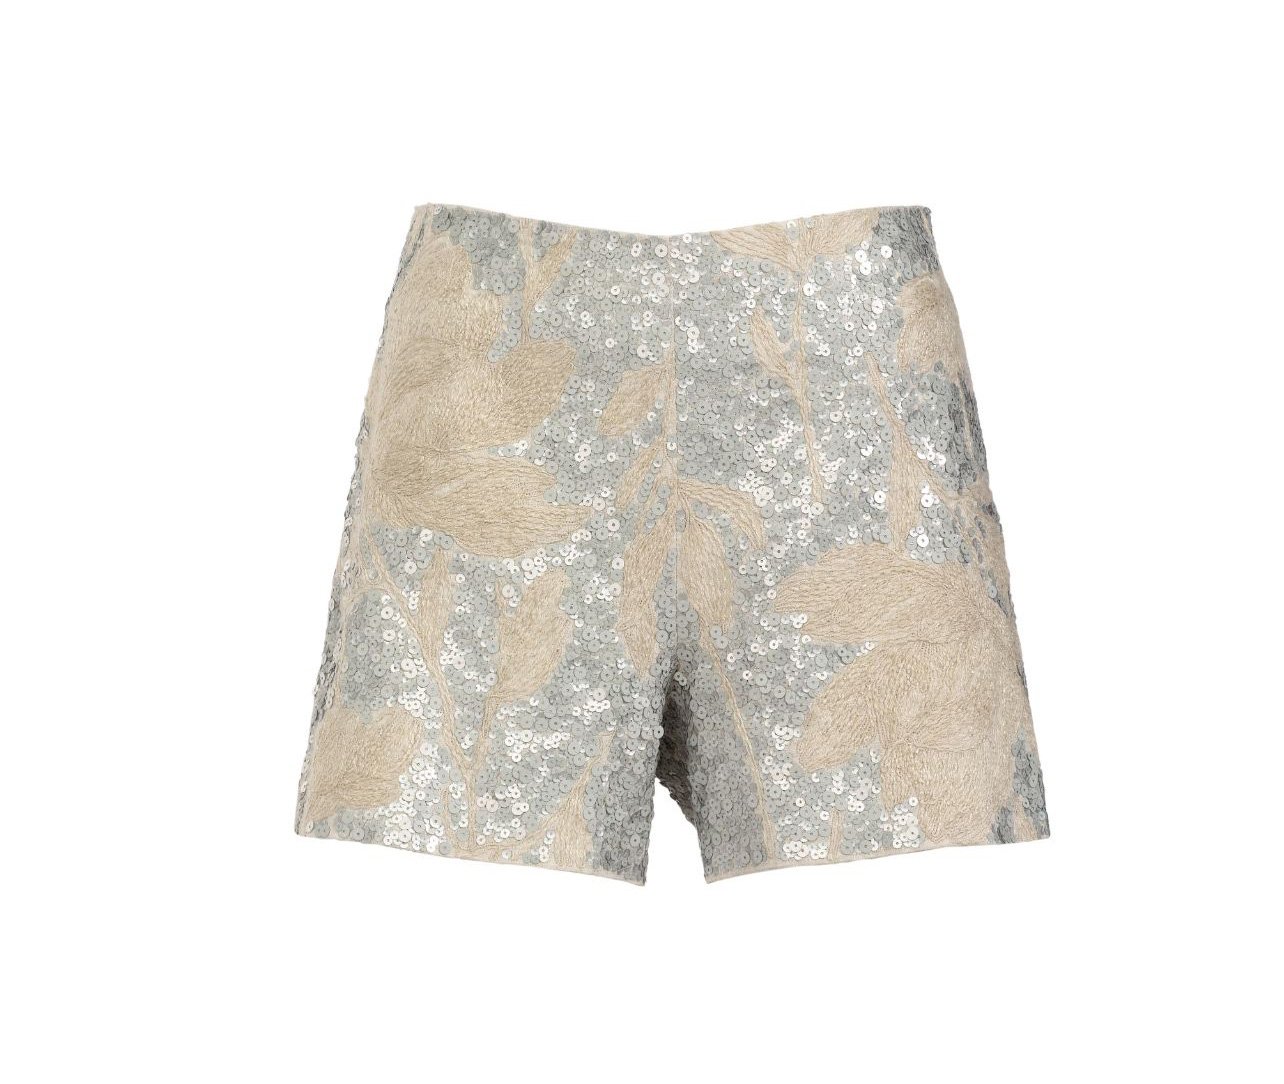 Brunello Cucinelli shorts in cream with silver metallic sequins and embroidering